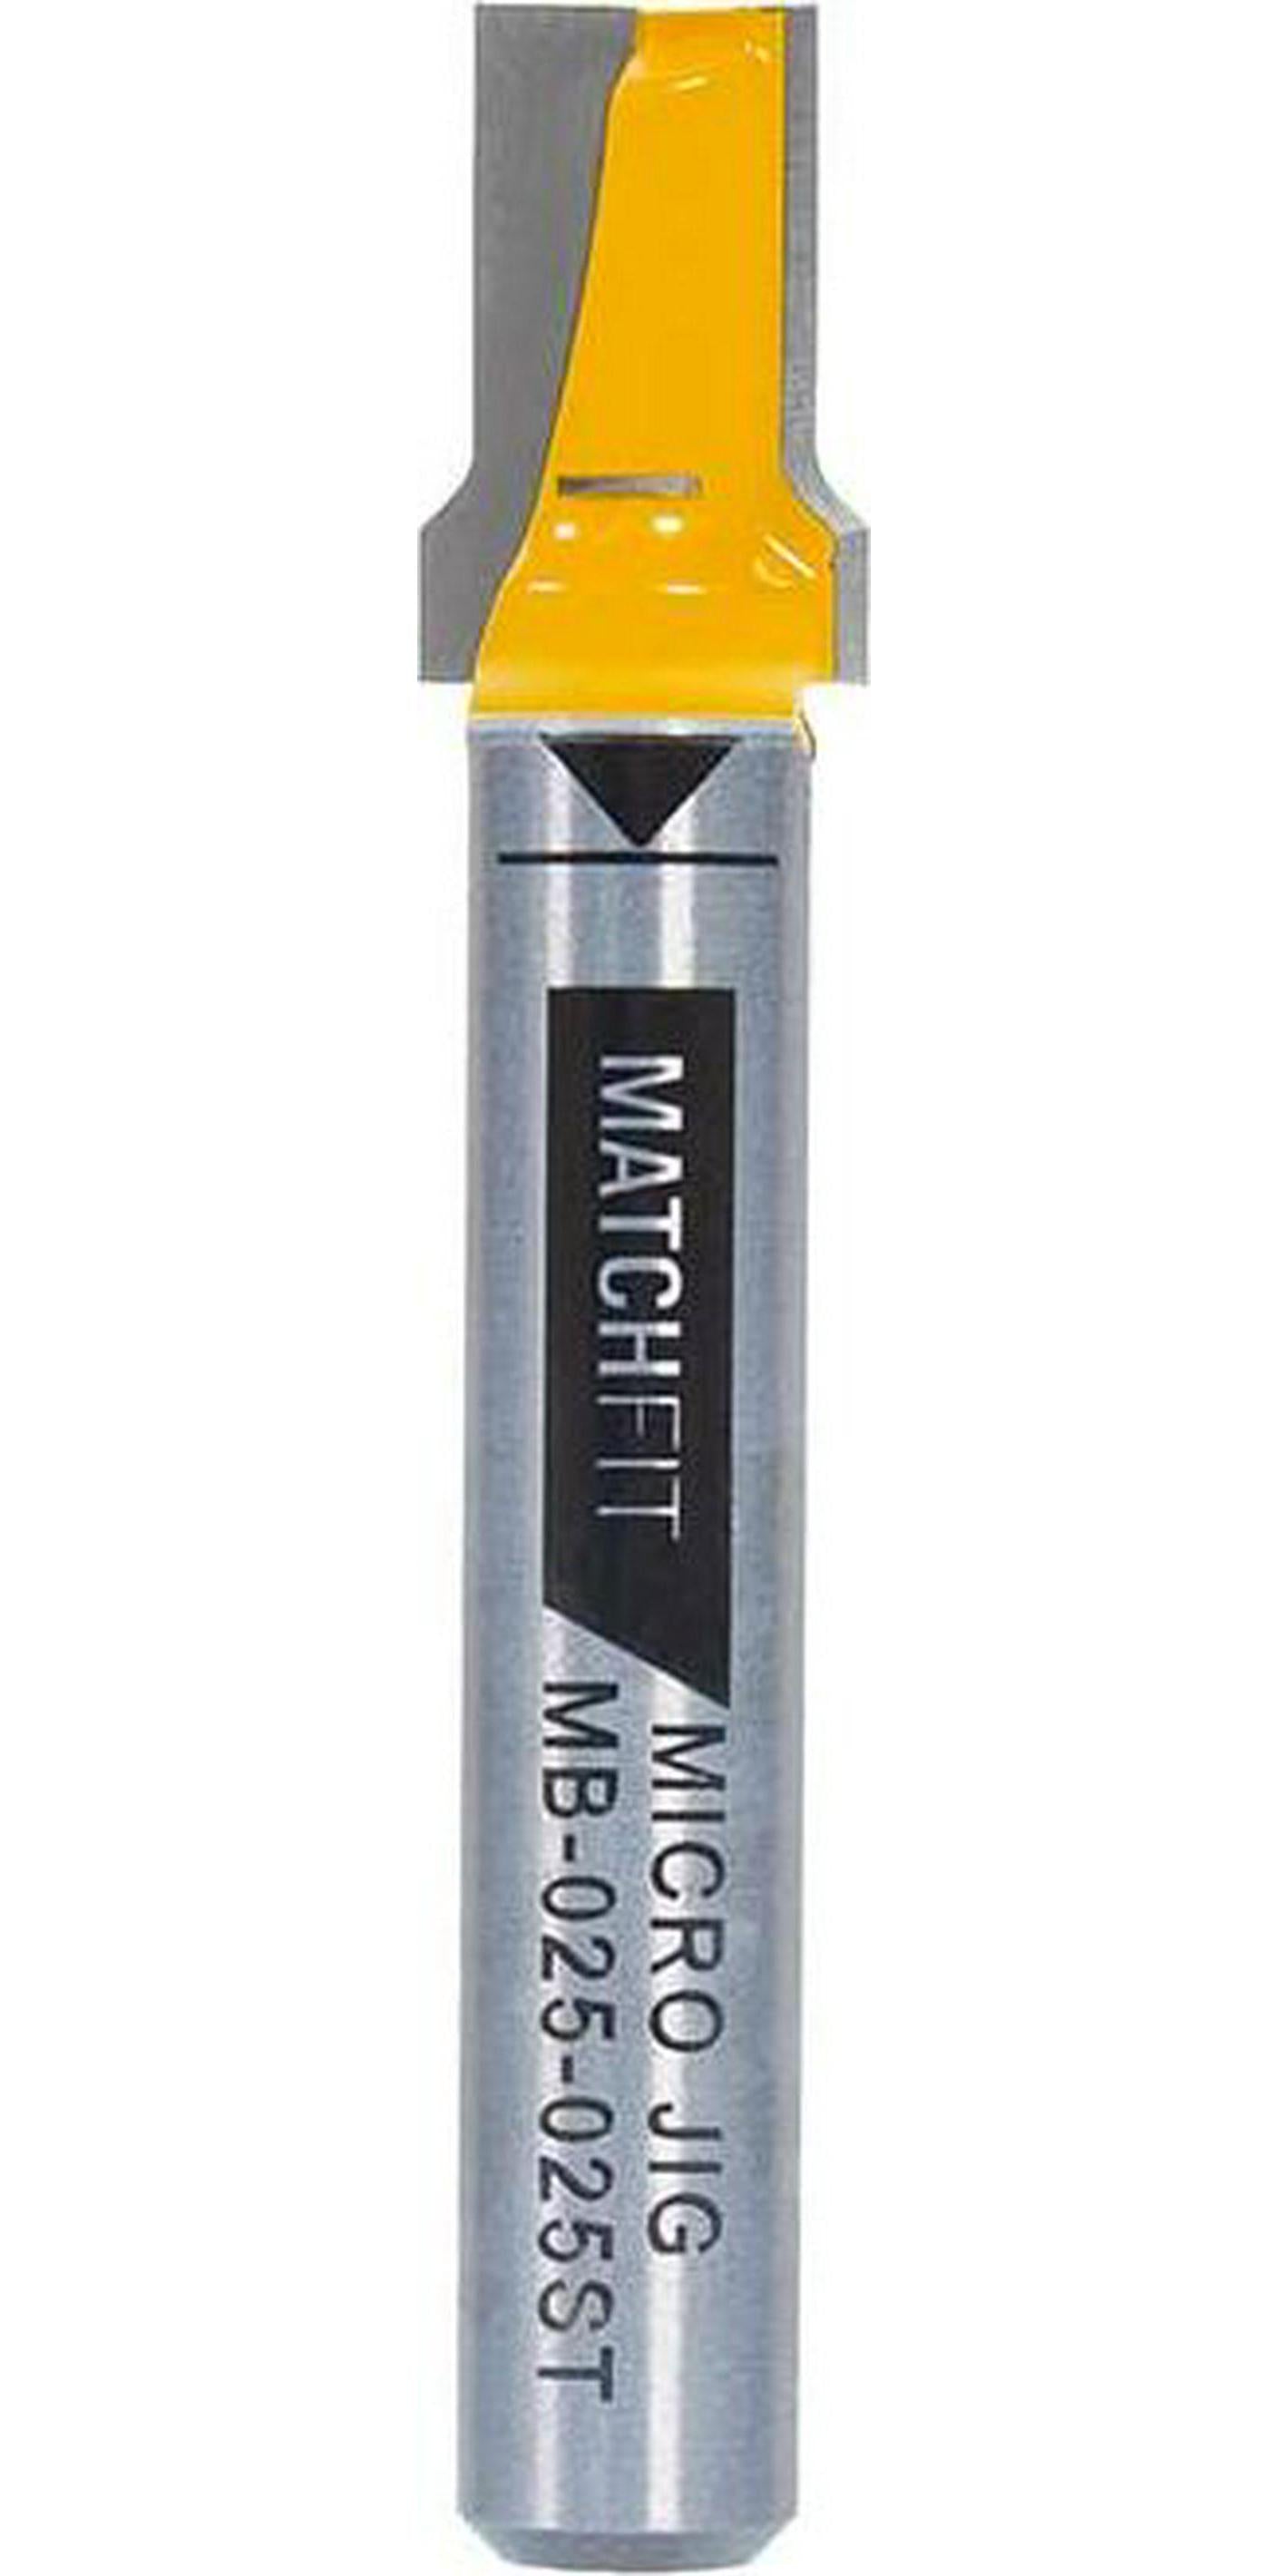 Micro Jig, Micro Jig 1/4-inch Shank Match Fit Dovetail Clamp Router Bit, Yellow